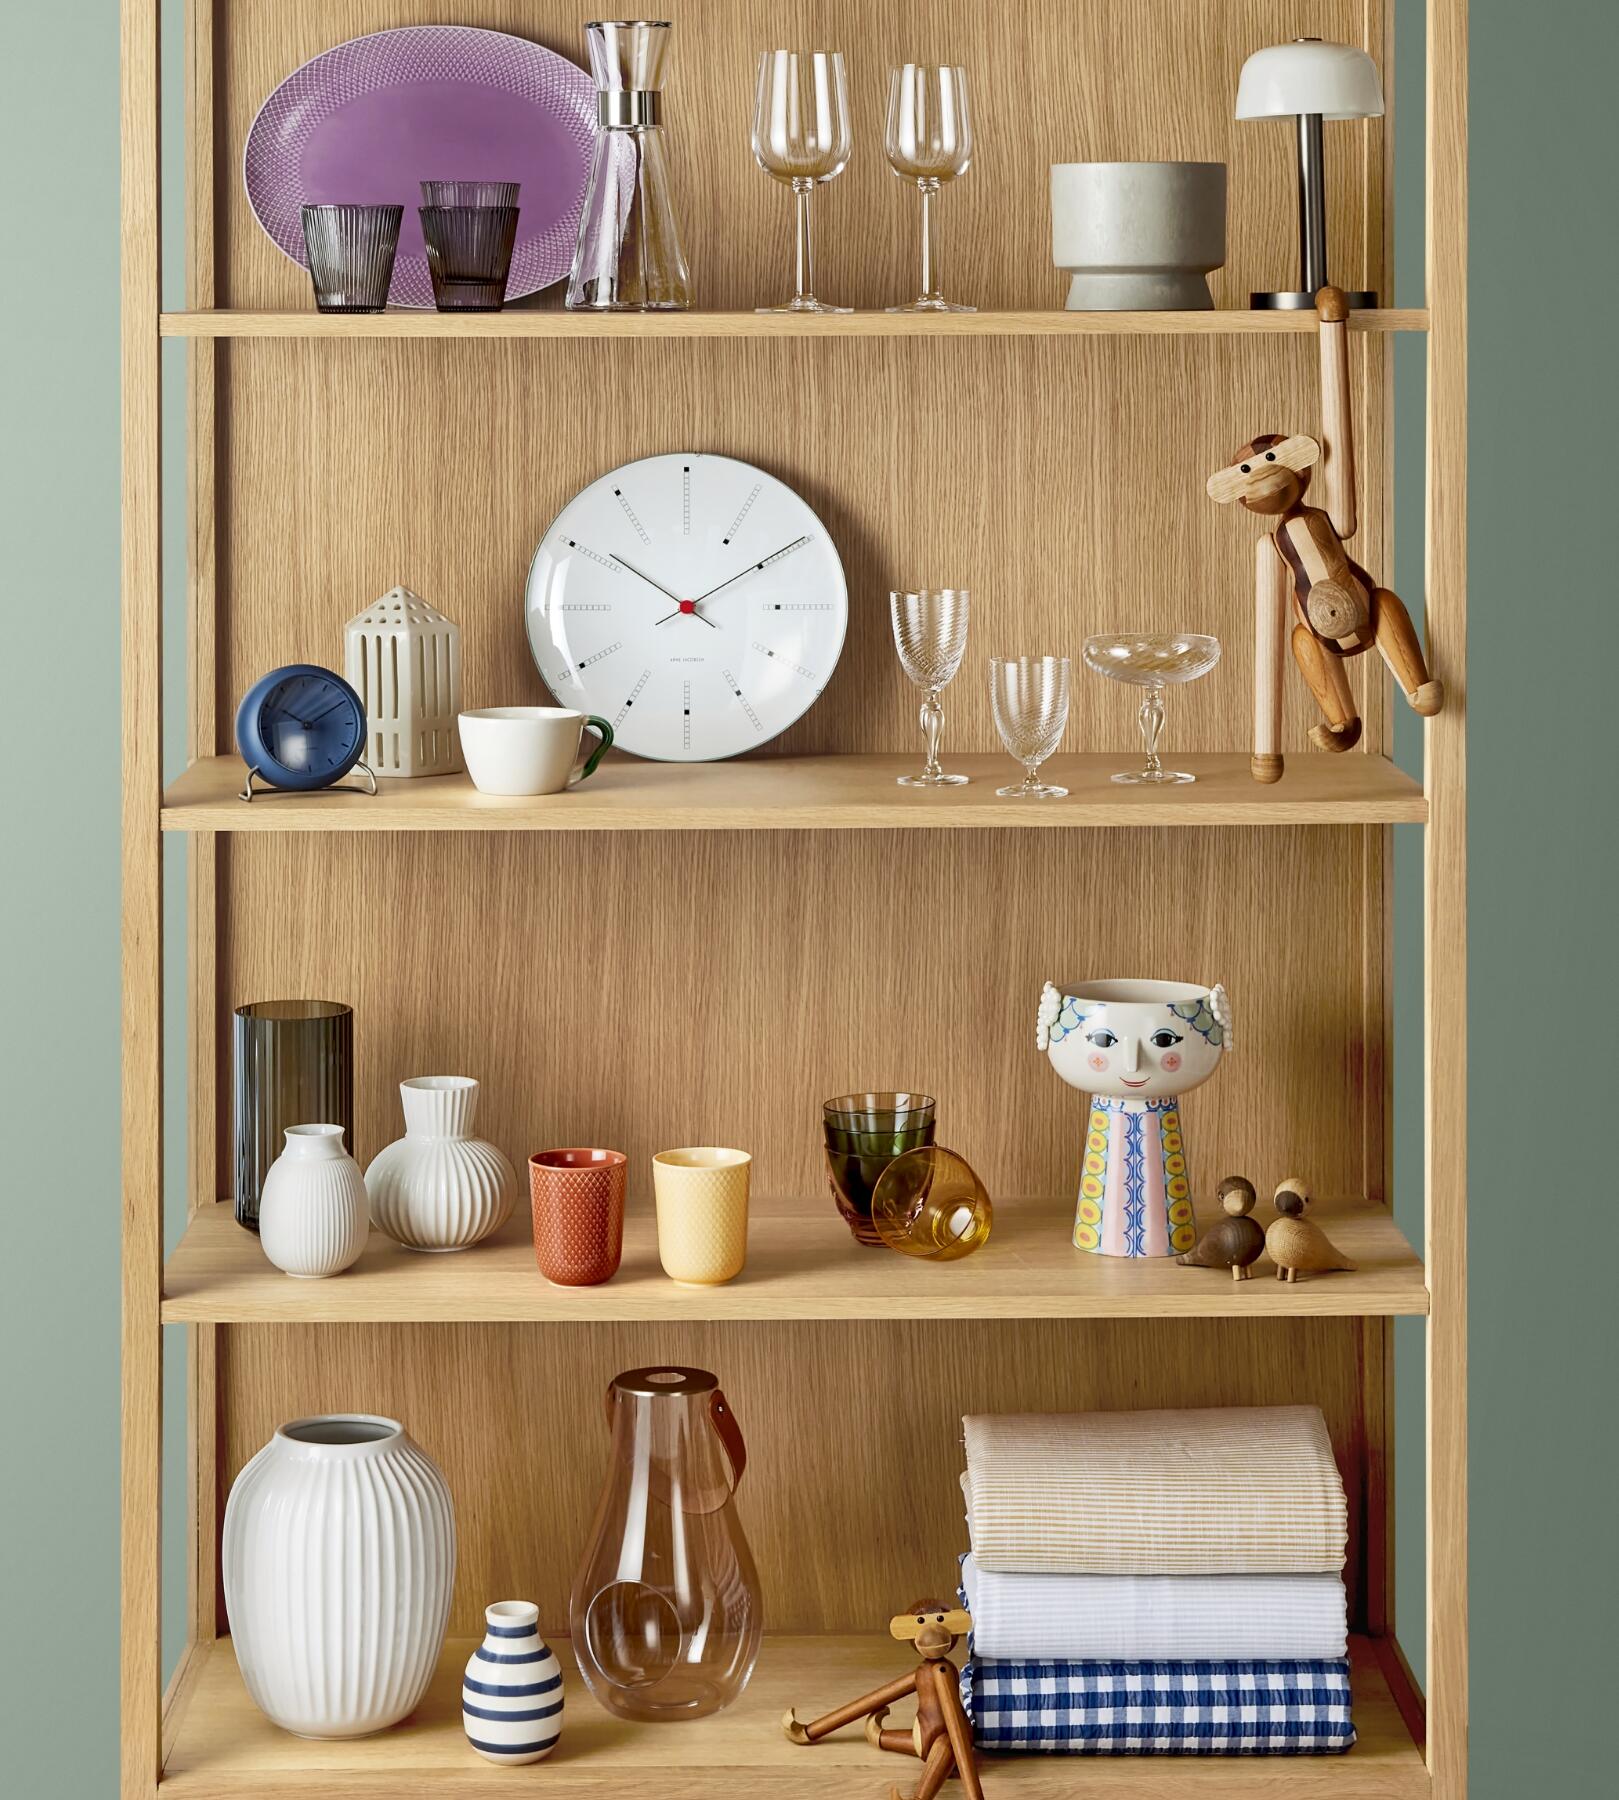 Shelf with a Bjørn Wiinblad vase, an Arne Jacobsen Clock, a Kay Bojesen Ape, wine glasses from  Homegaard, a big white vase from Kähler, two colorful mugs from Lyngby and towels from Juna. 